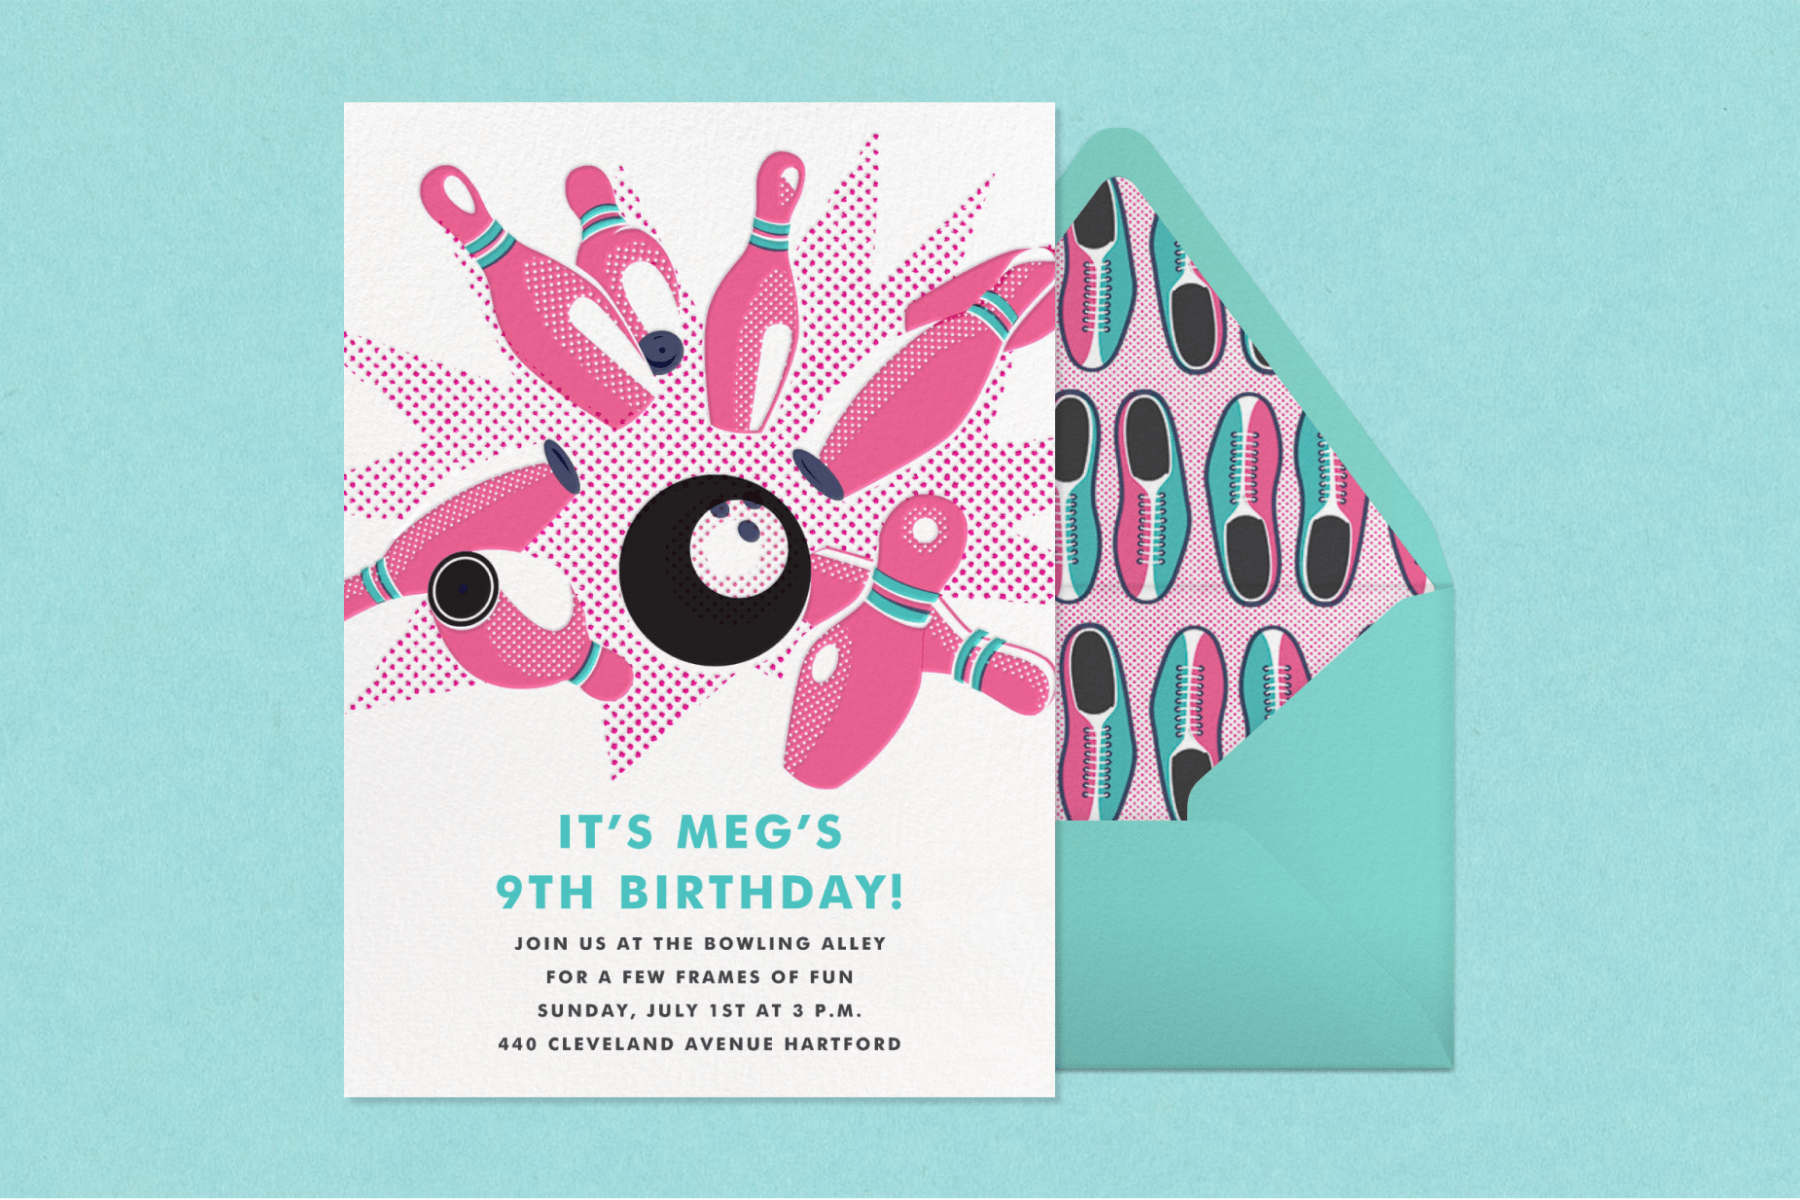 A birthday invitation with a pink rasterized image of a bowling ball knocking down pins beside a turquoise envelope with bowling shoes liner.